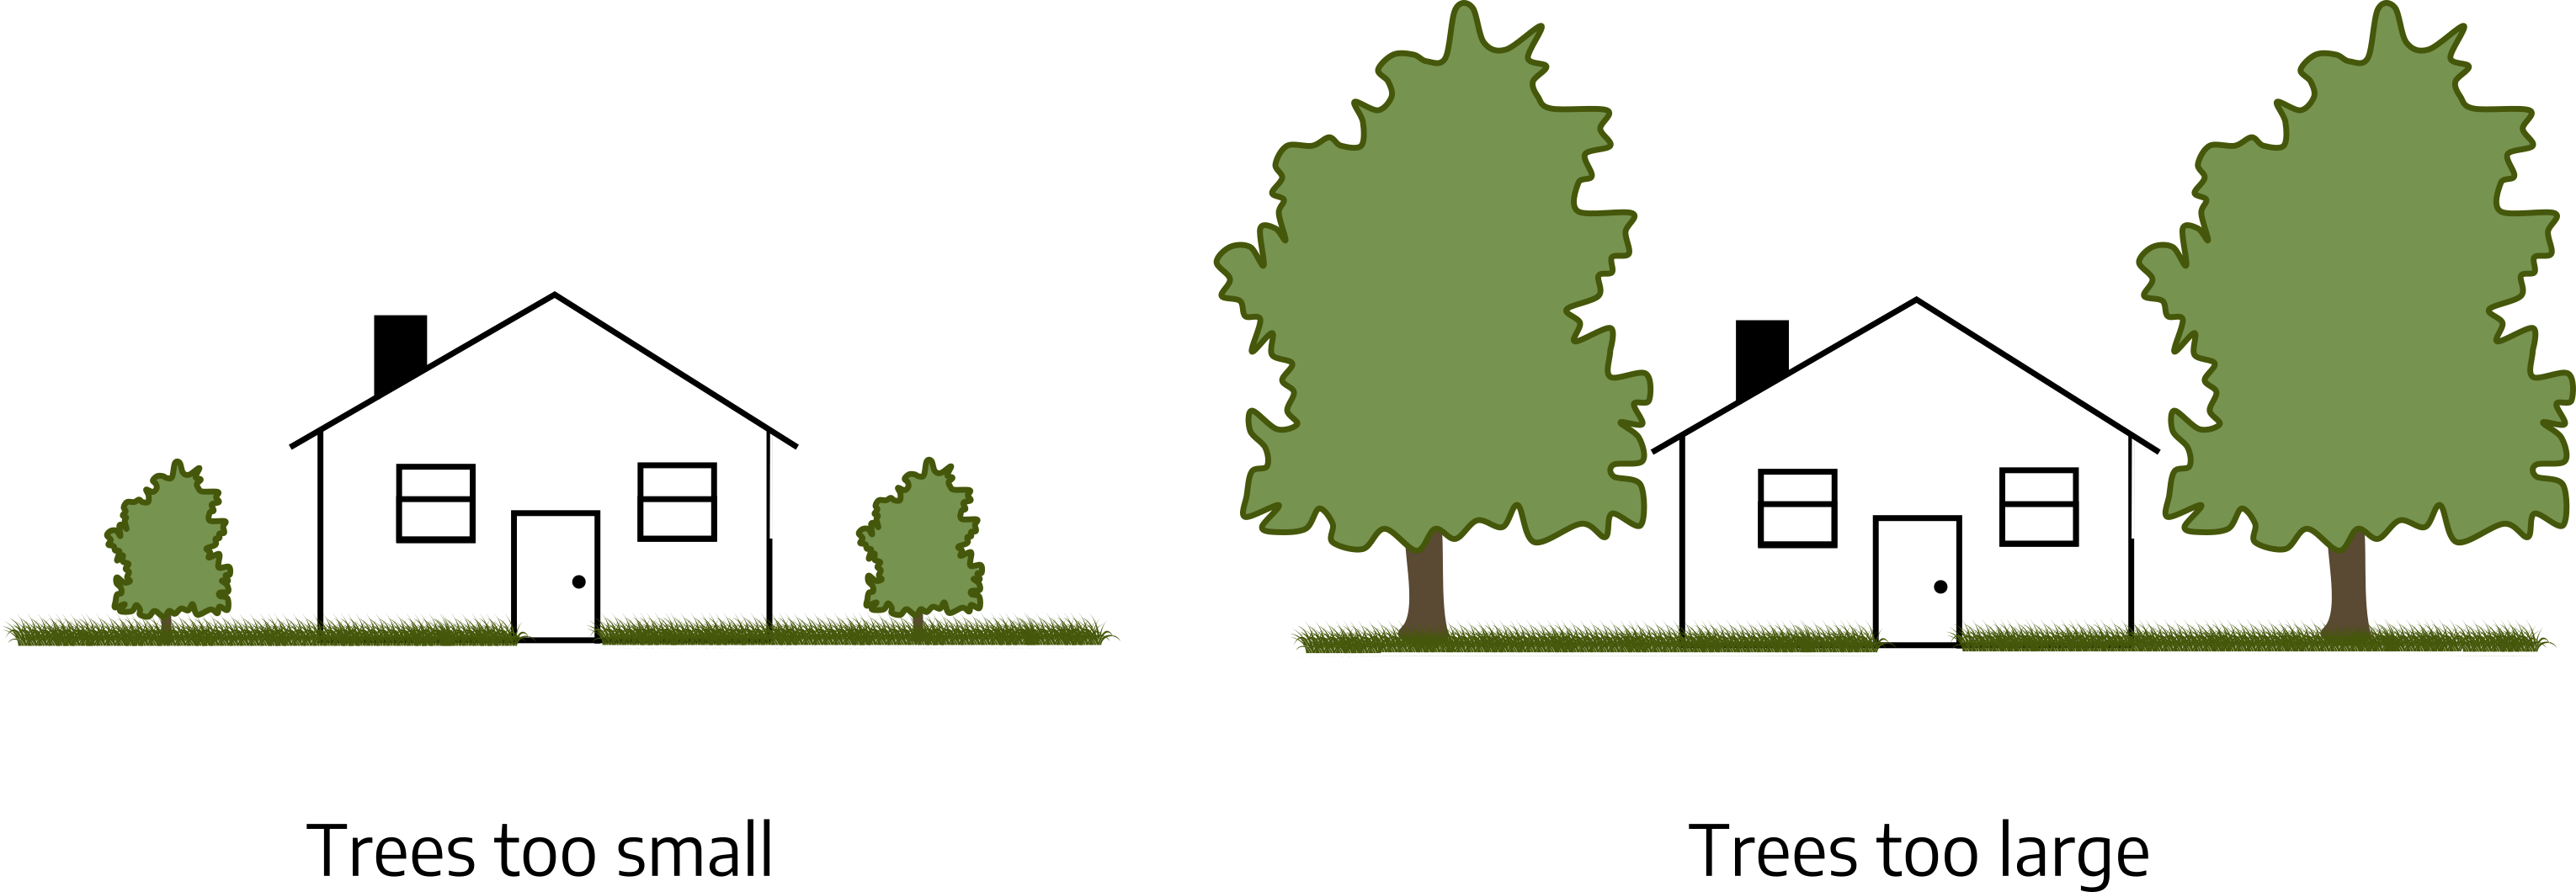 Two cartoon drawings. The first is "trees to0 small," a house drawing with two small green trees, one on each side. The second is "trees too large," a house drawing with two large green trees taller than the house, on on each side.